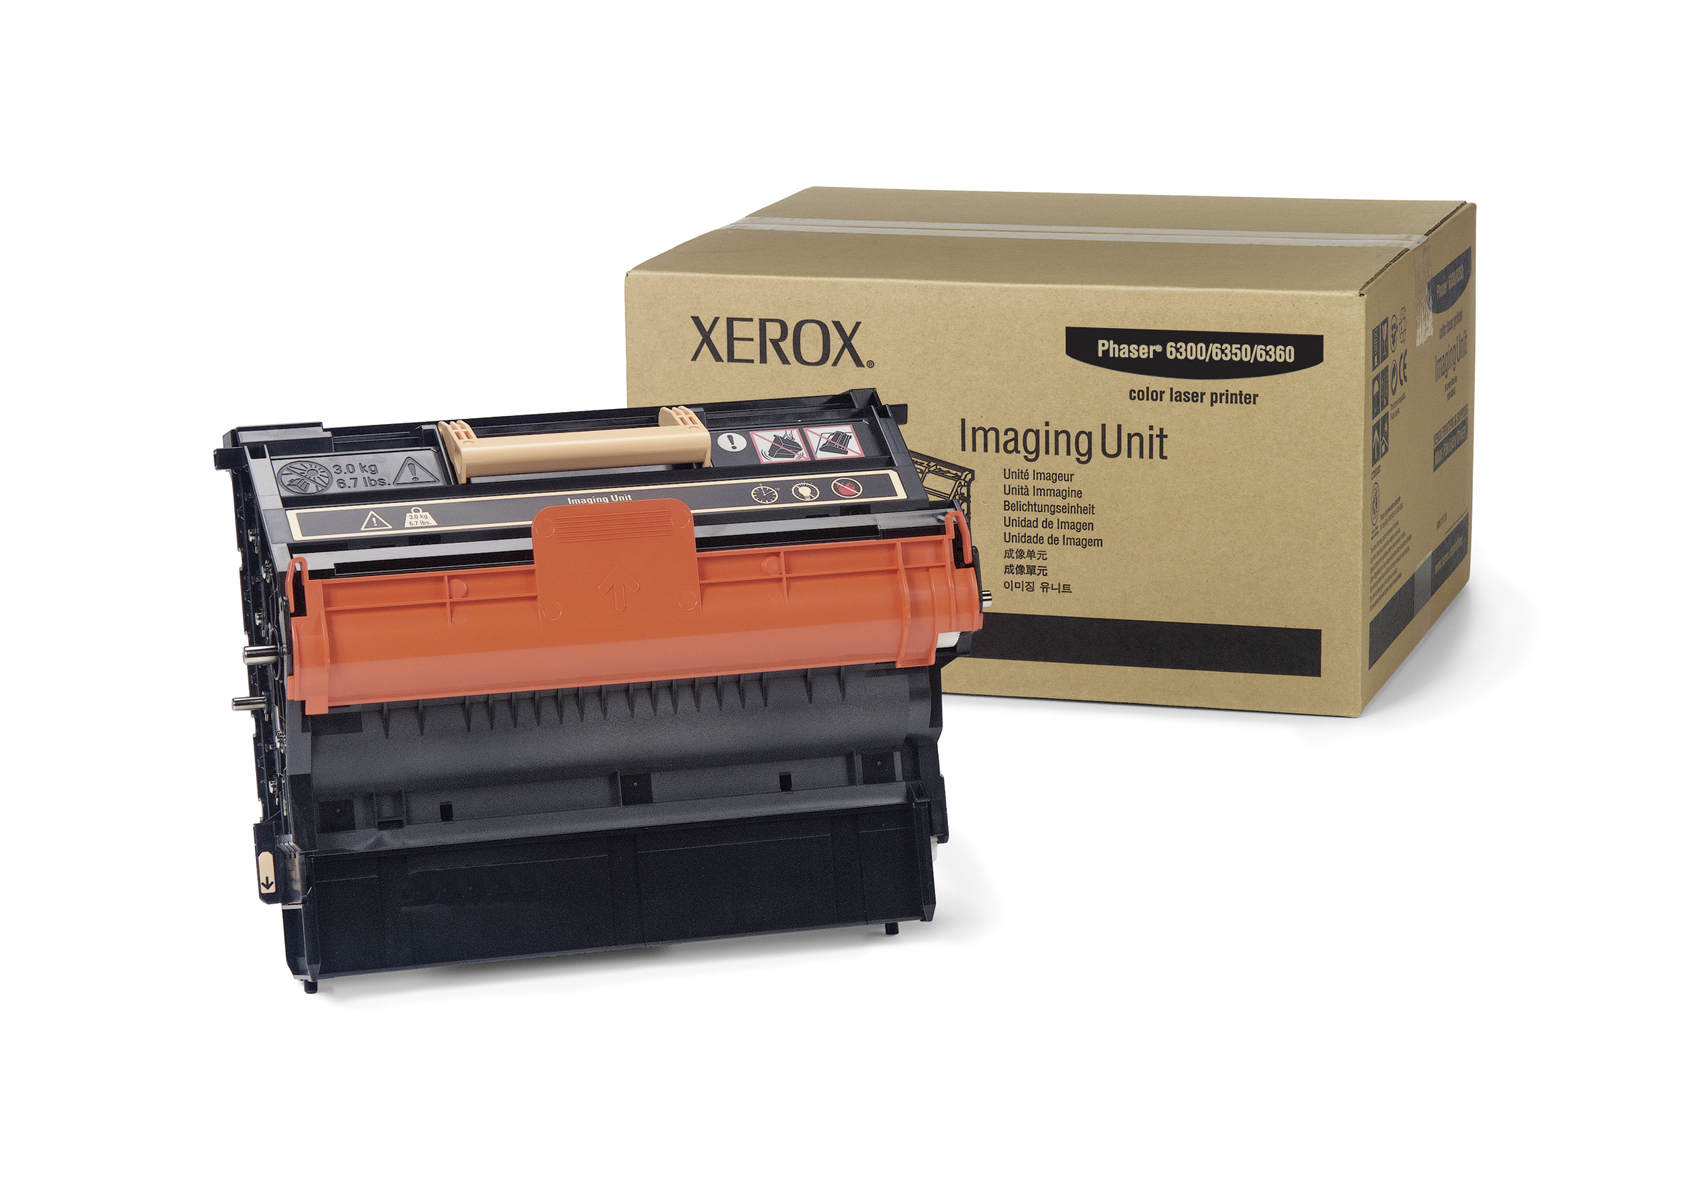 Xerox 108R00645 Drum kit, 35K pages for Xerox Phaser 6300/6350/6360